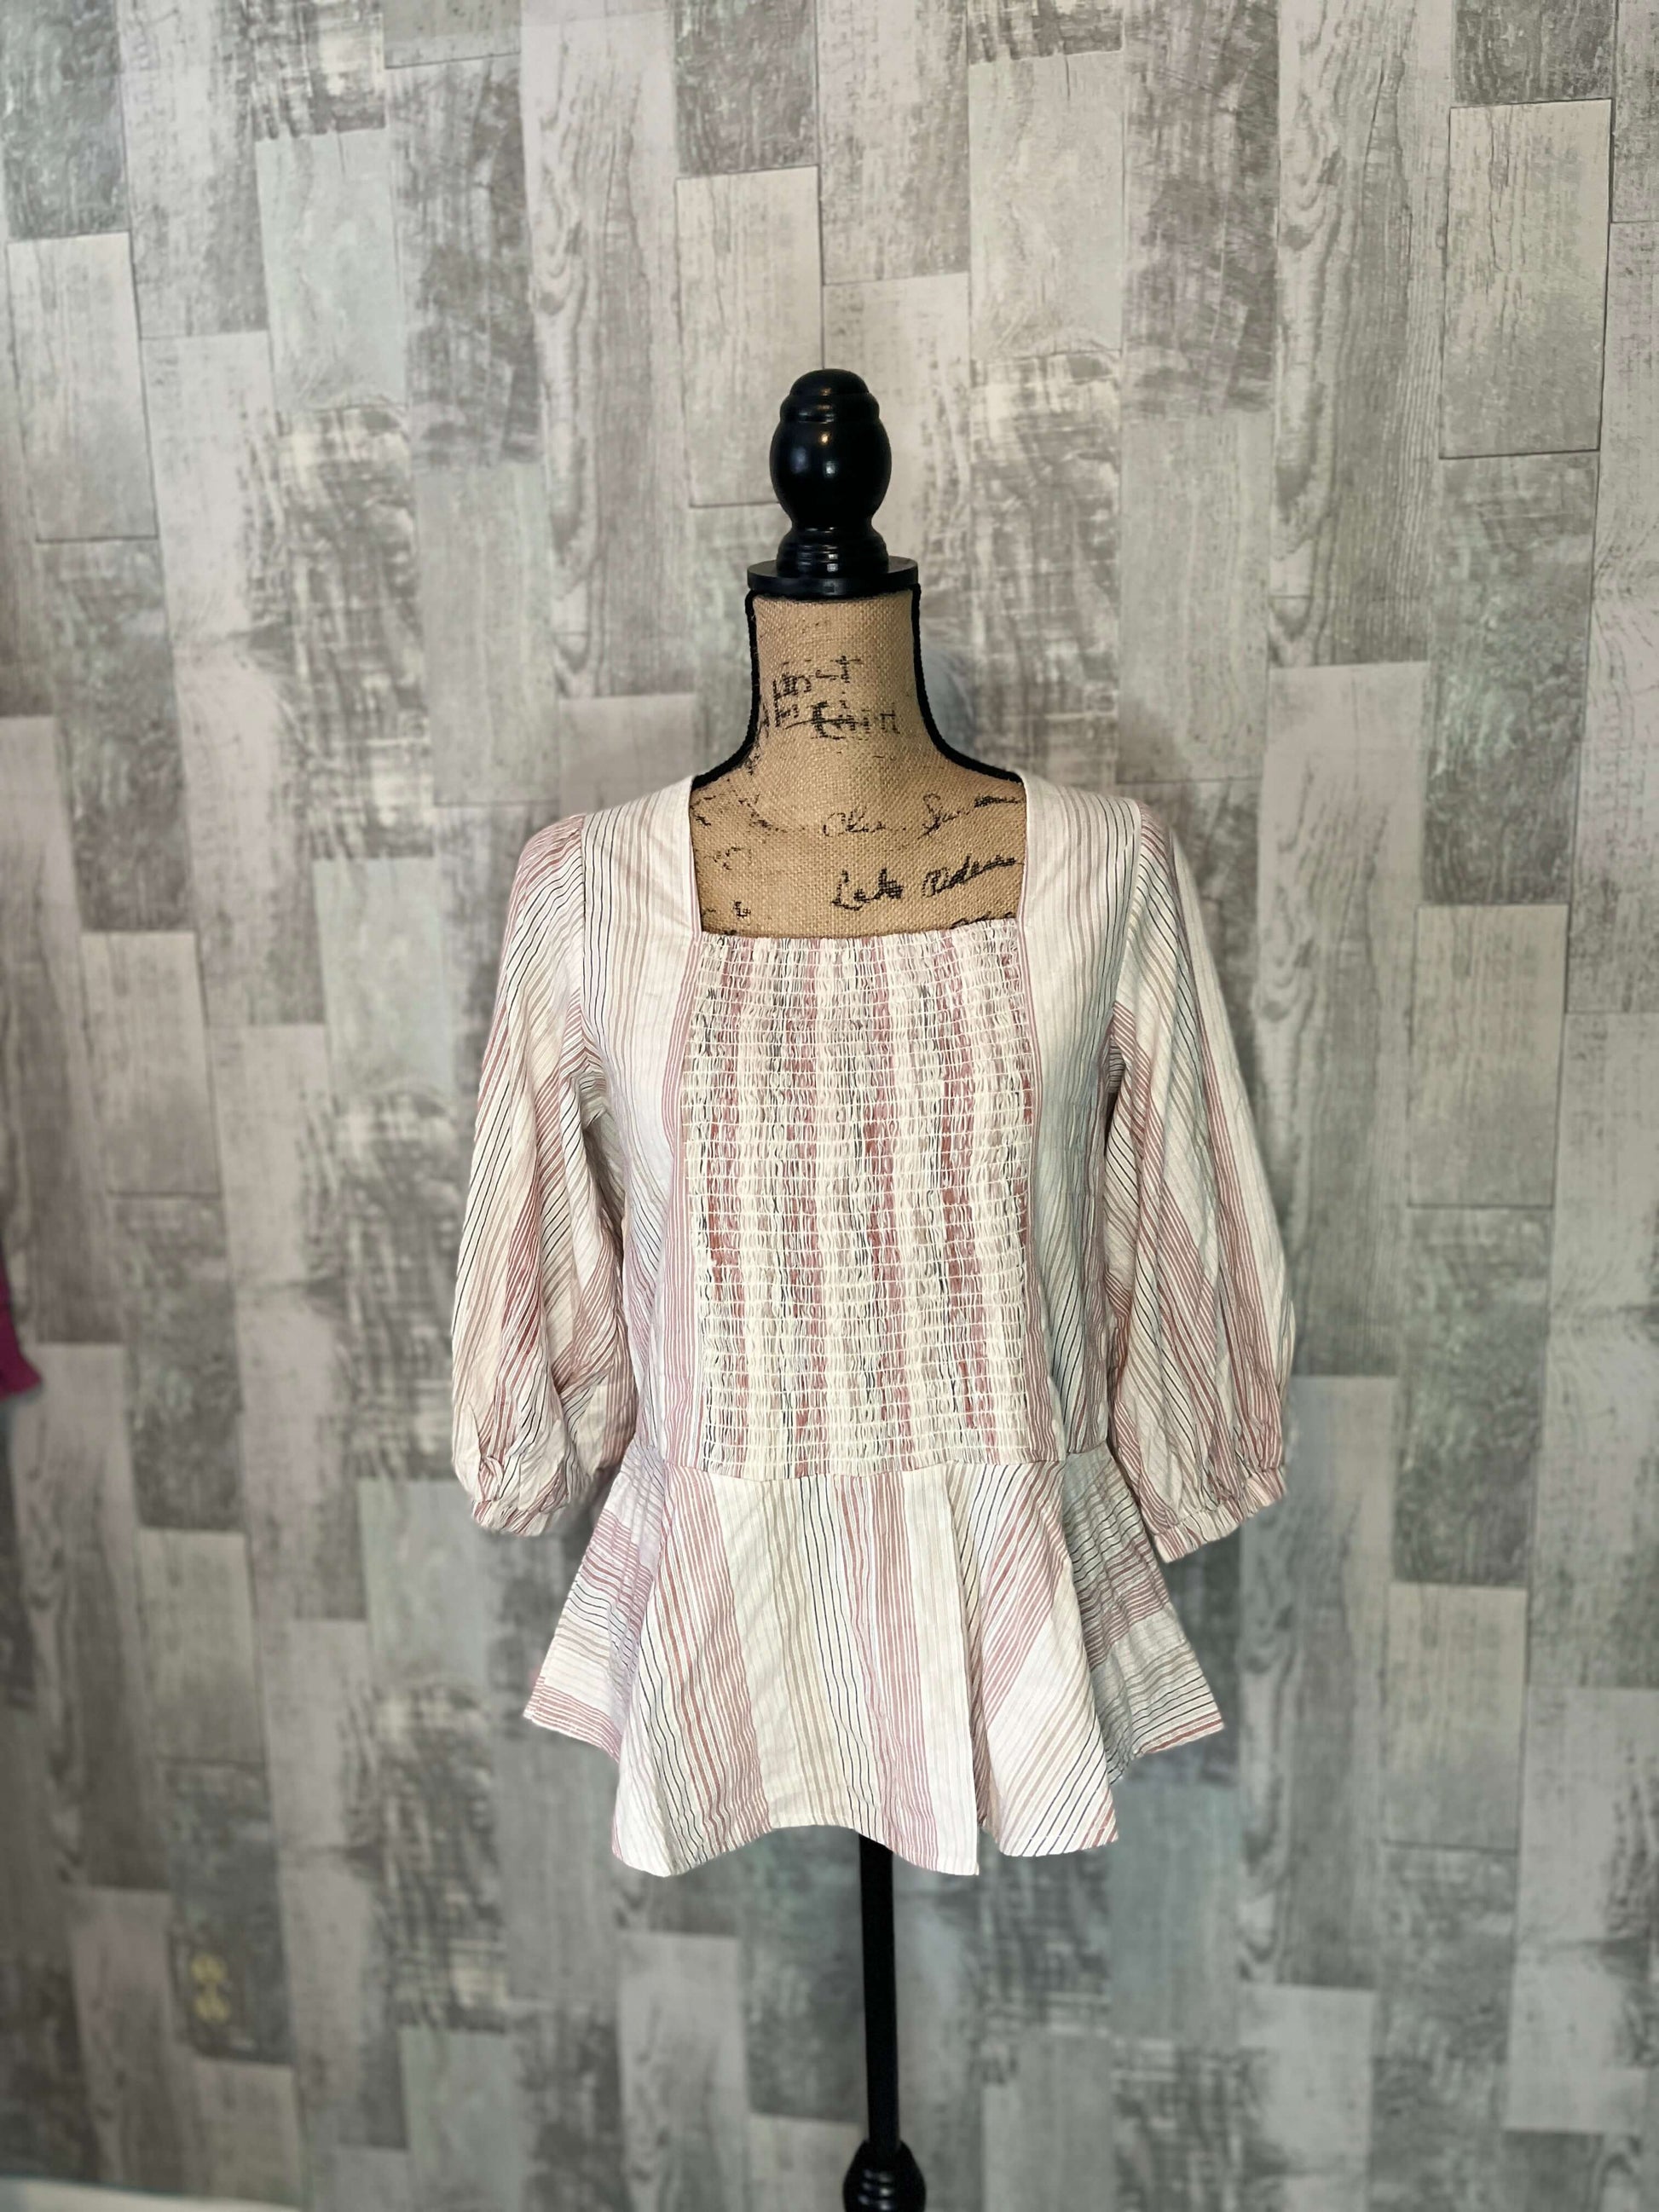 Shirts & Tops 3/4 length sleeve top, 3/4 length top, apparel & accessories, clothing, keyhole back, multi stripe print, peplum hem, shirts & tops, smocked bodice, smocked top, square neck, square neckline Size: Small, Medium, Large